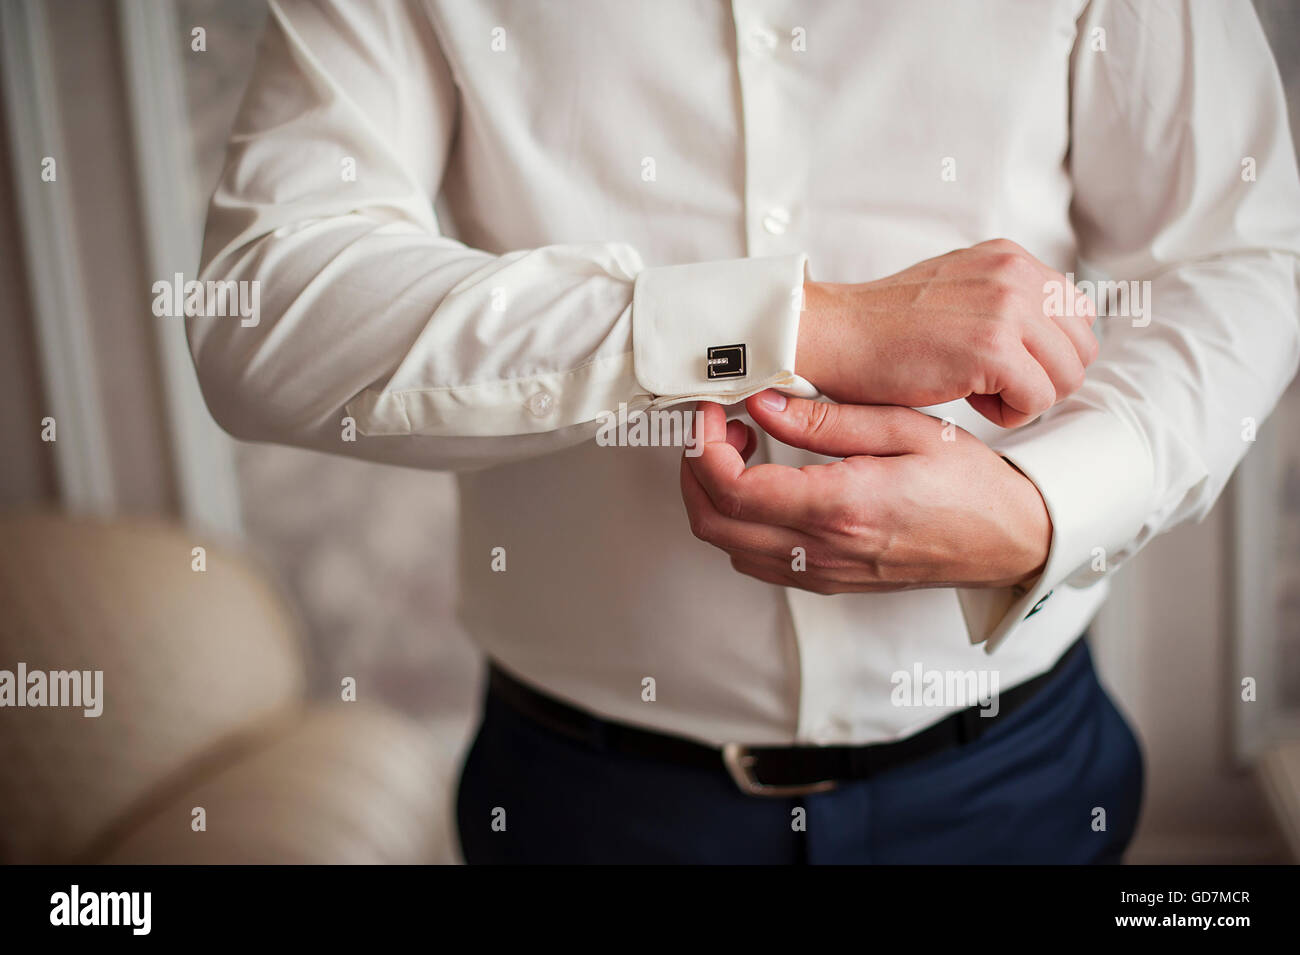 Man's style. dressing suit, shirt and cuffs Stock Photo